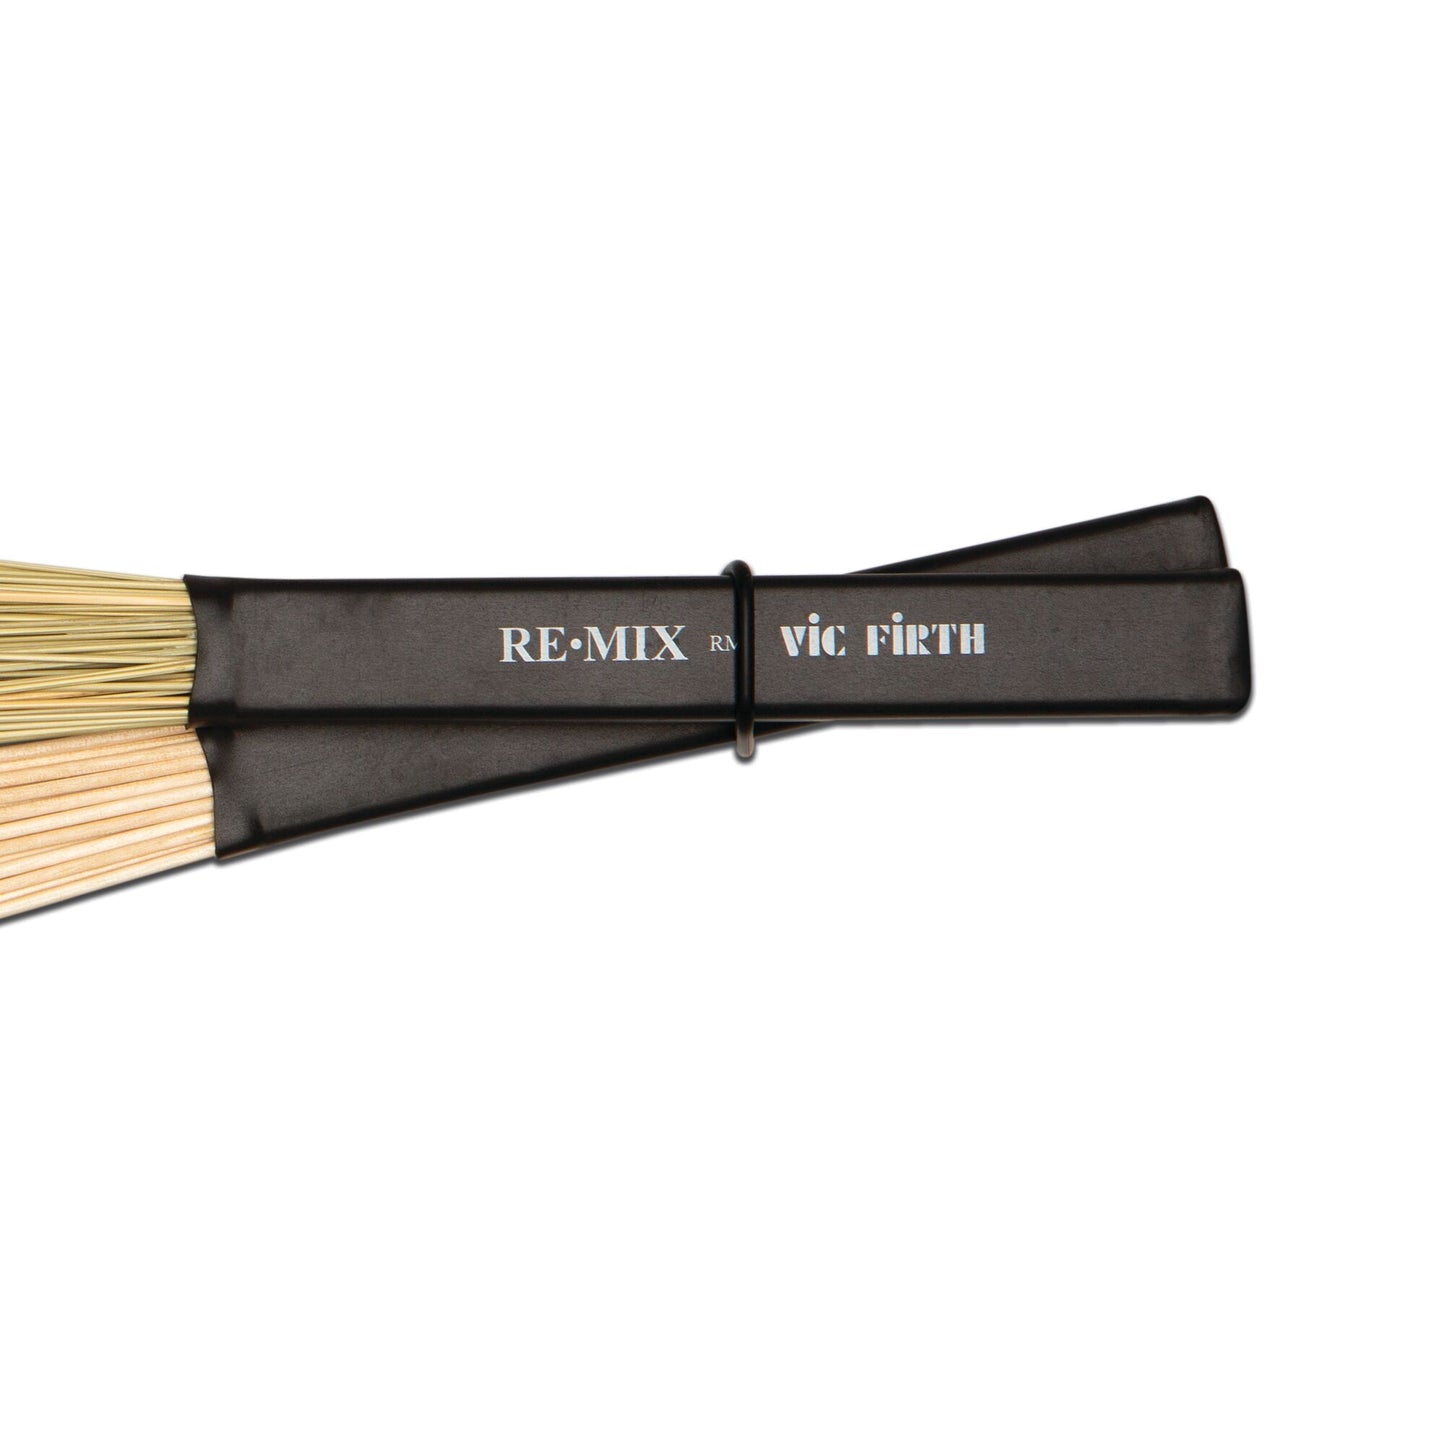 RE·MIX 2-Pair Combo Pack - Grass & Birch Brushes